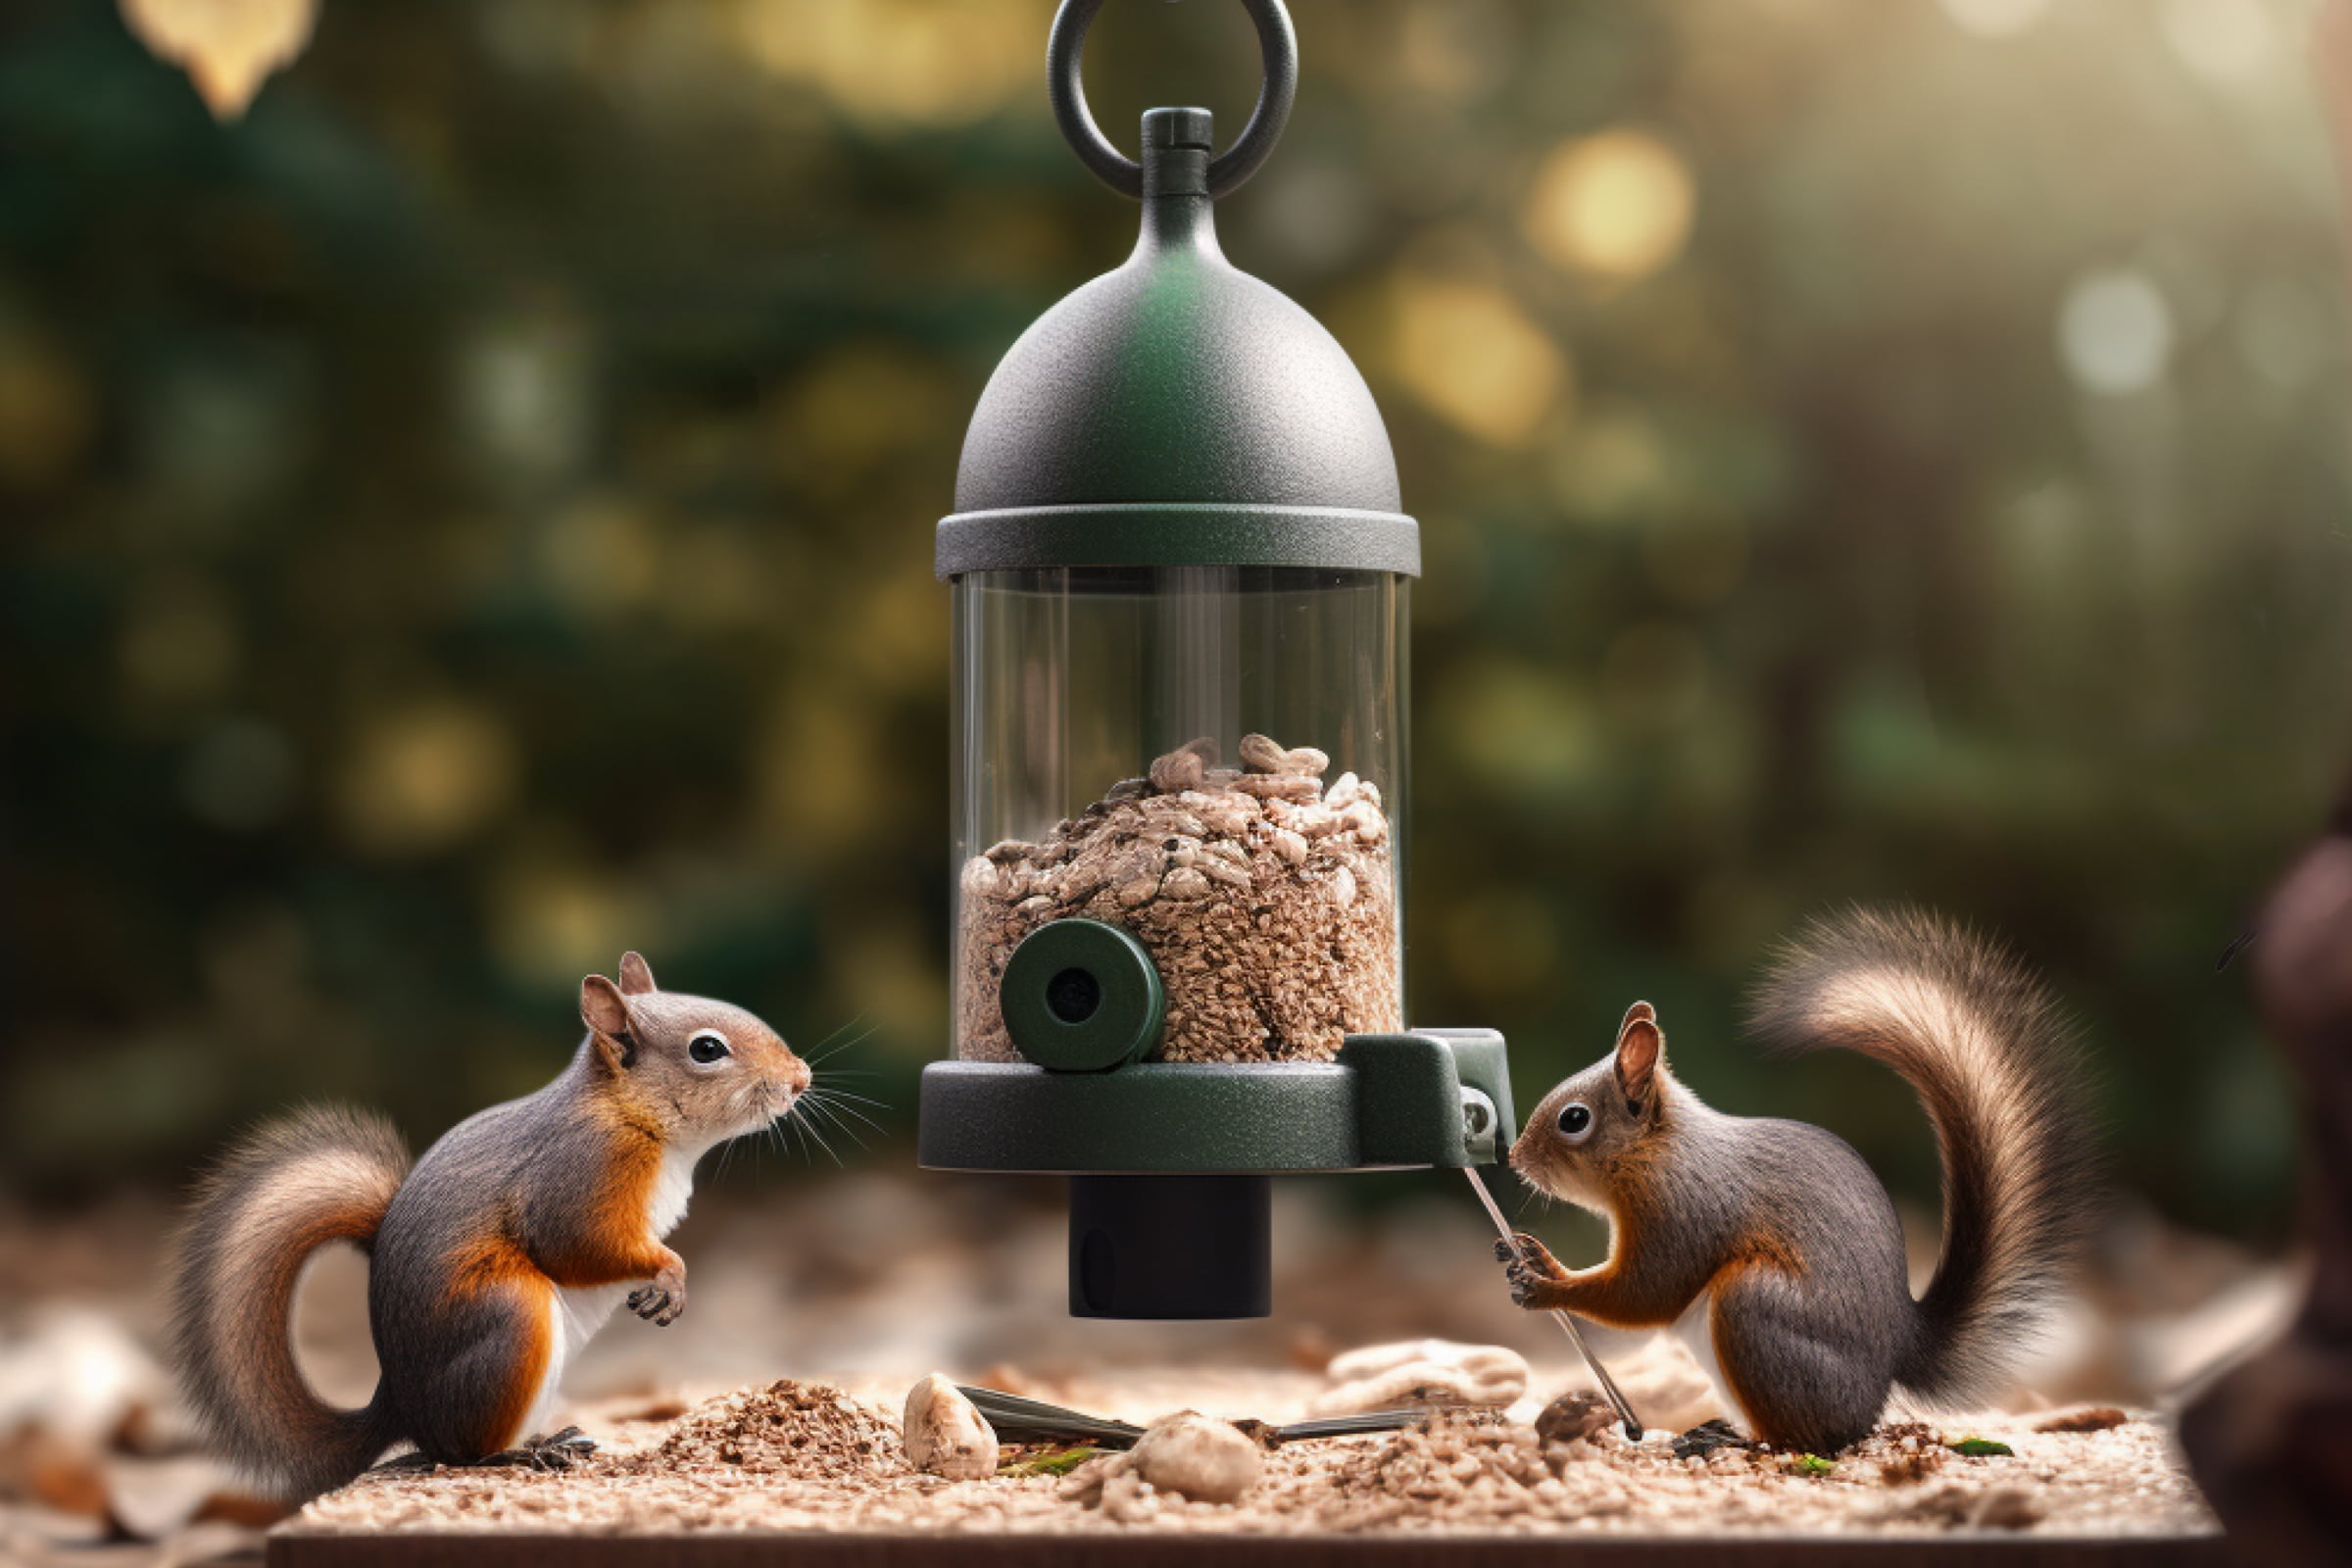 A Comprehensive Guide on How to Squirrel Proof a Bird Feeder